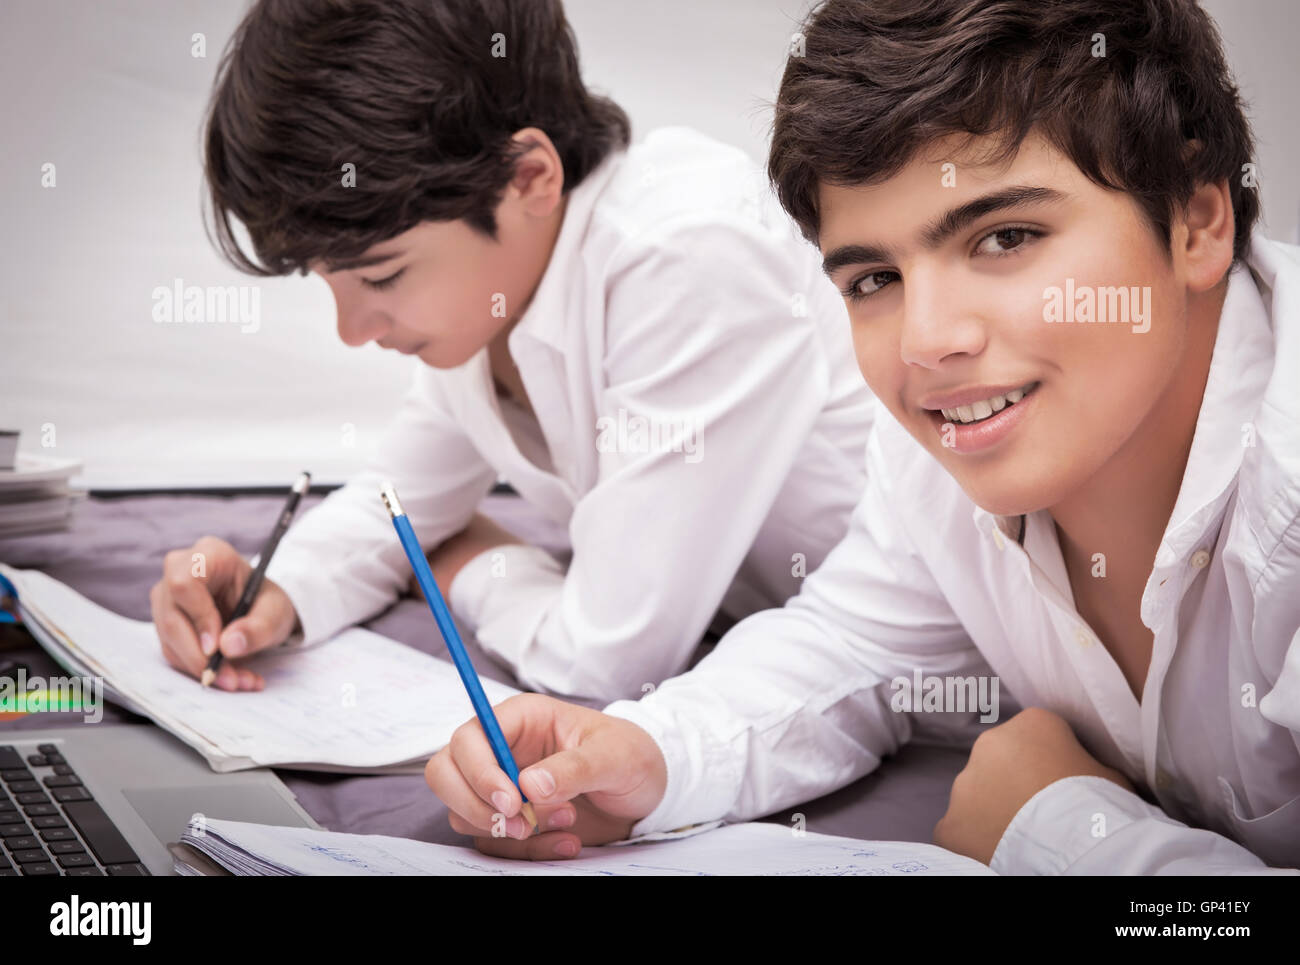 Two teenage boys doing homework at home, writing something in their notebooks, enjoying at school, education concept Stock Photo